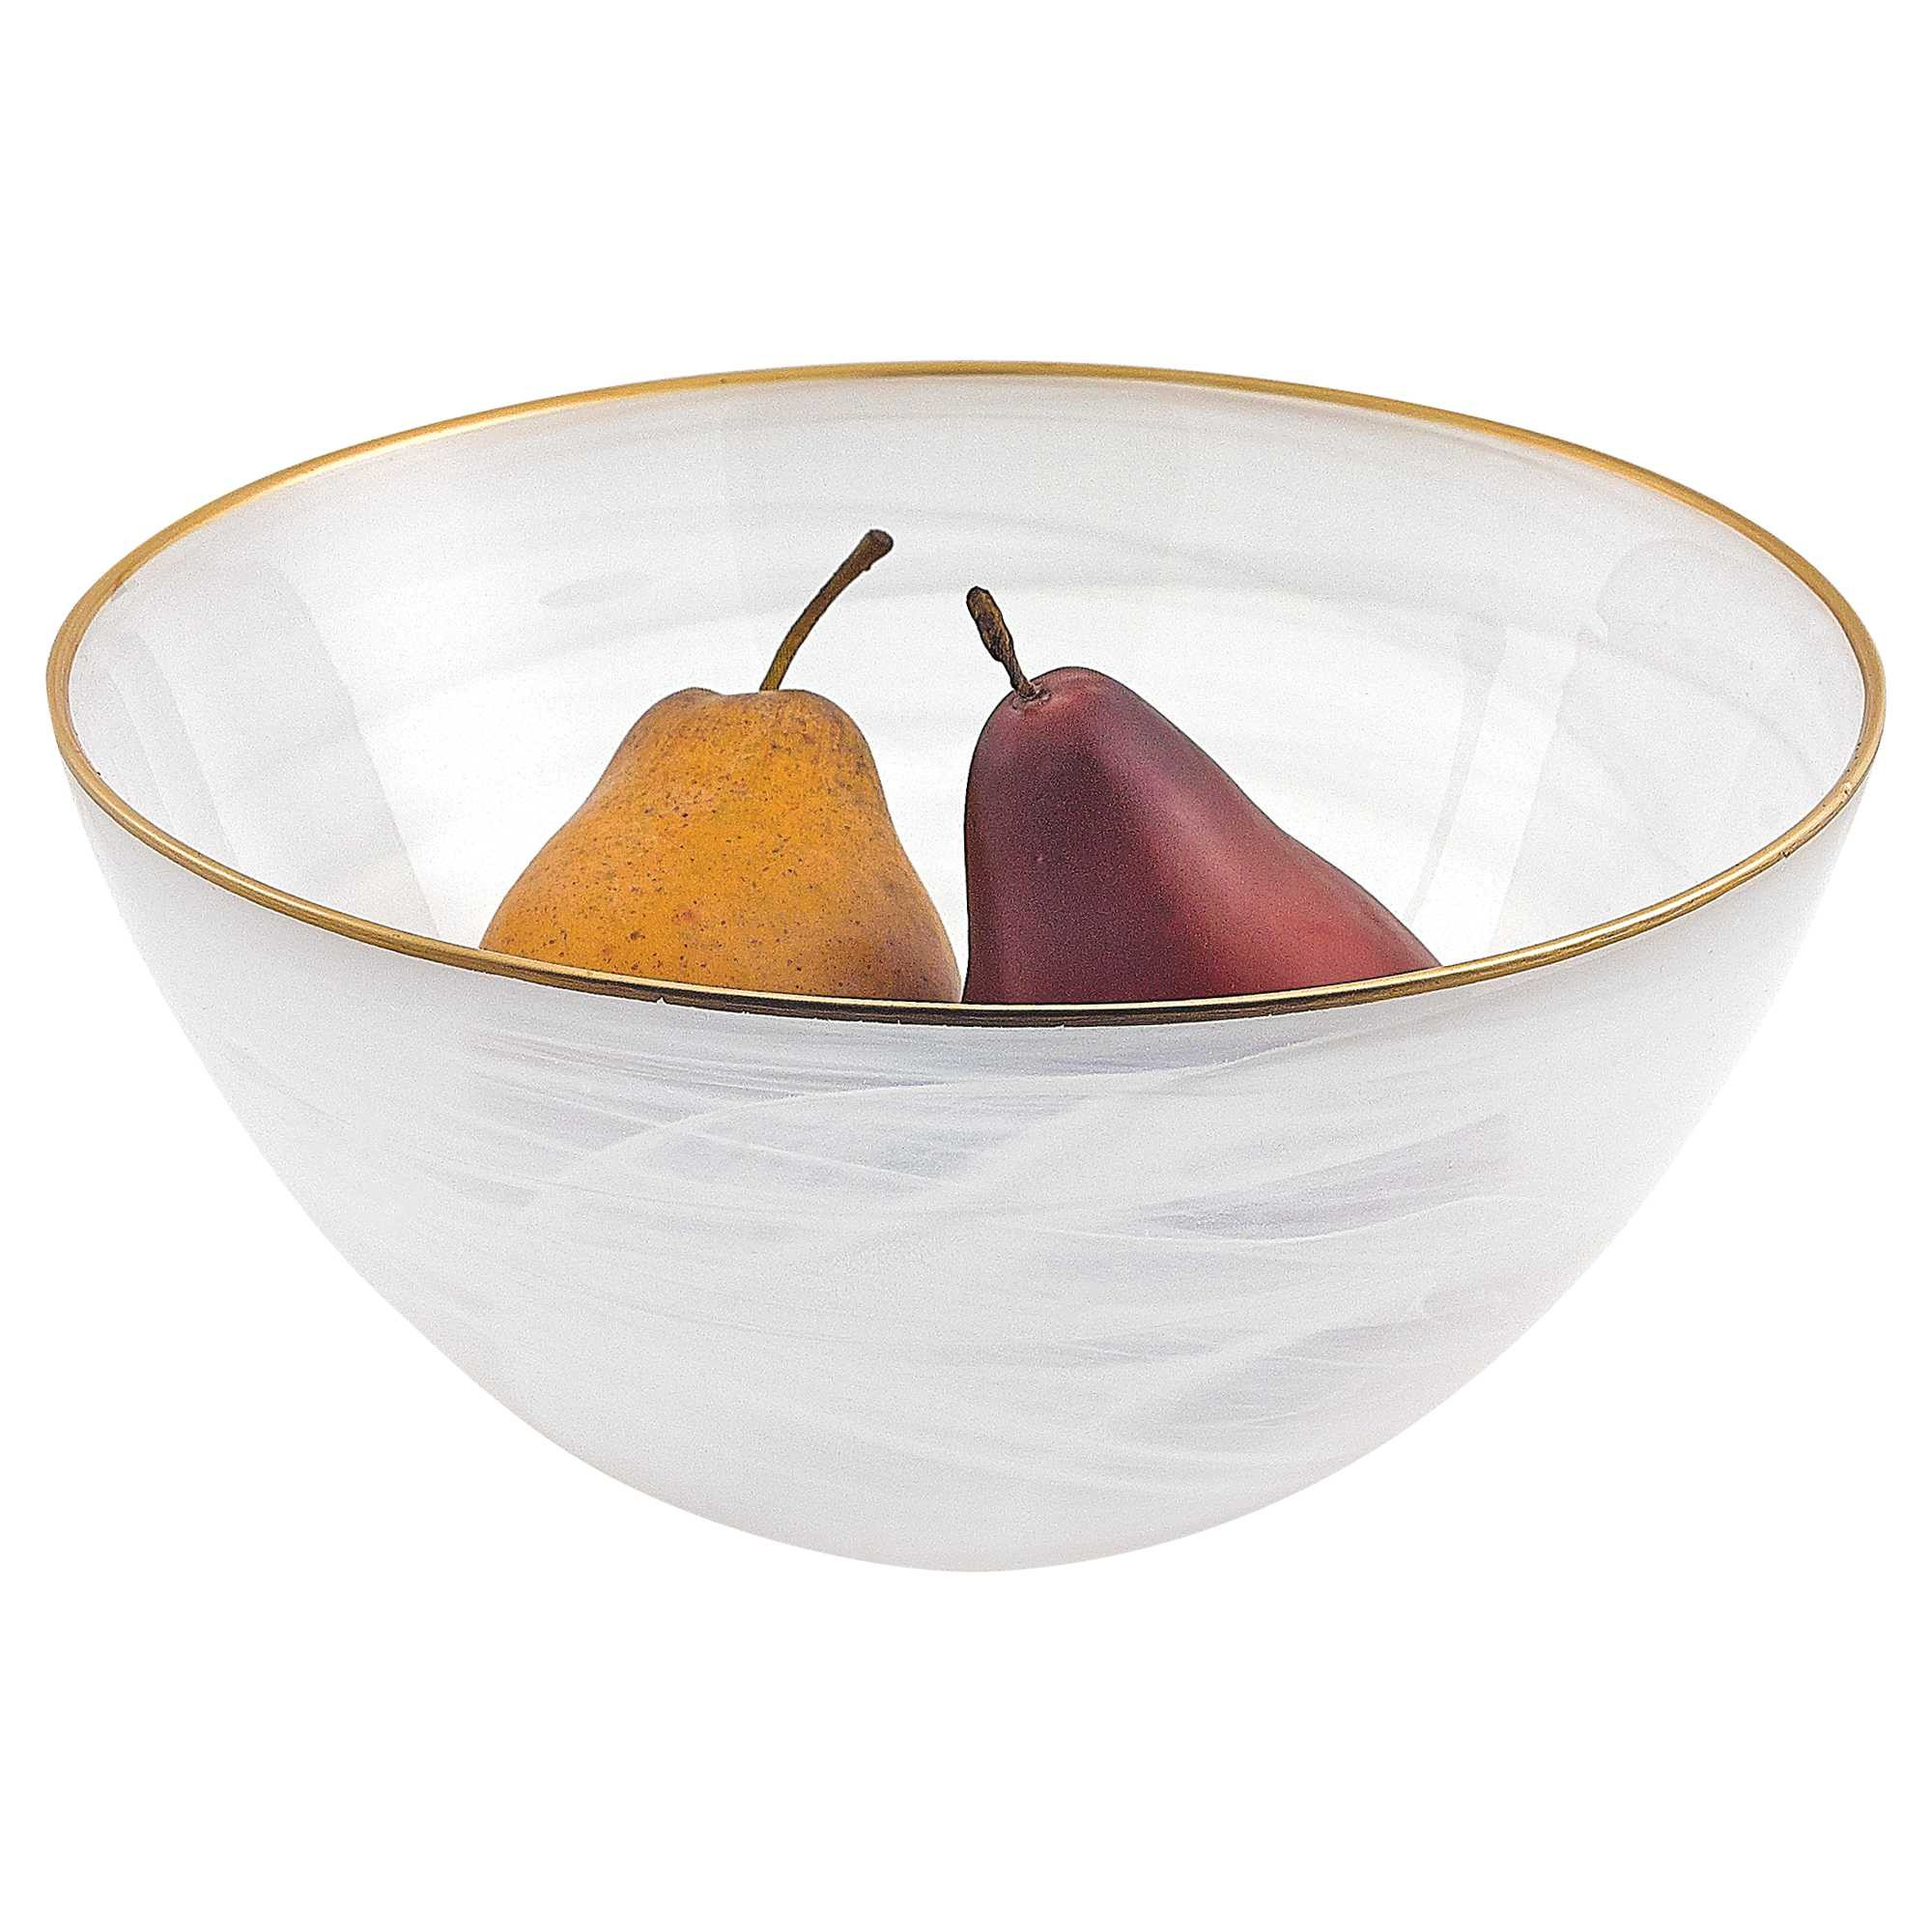 10 Hand Crafted White Gold Glass Fruit Or Salad Bowl With Gold Rim-375867-1